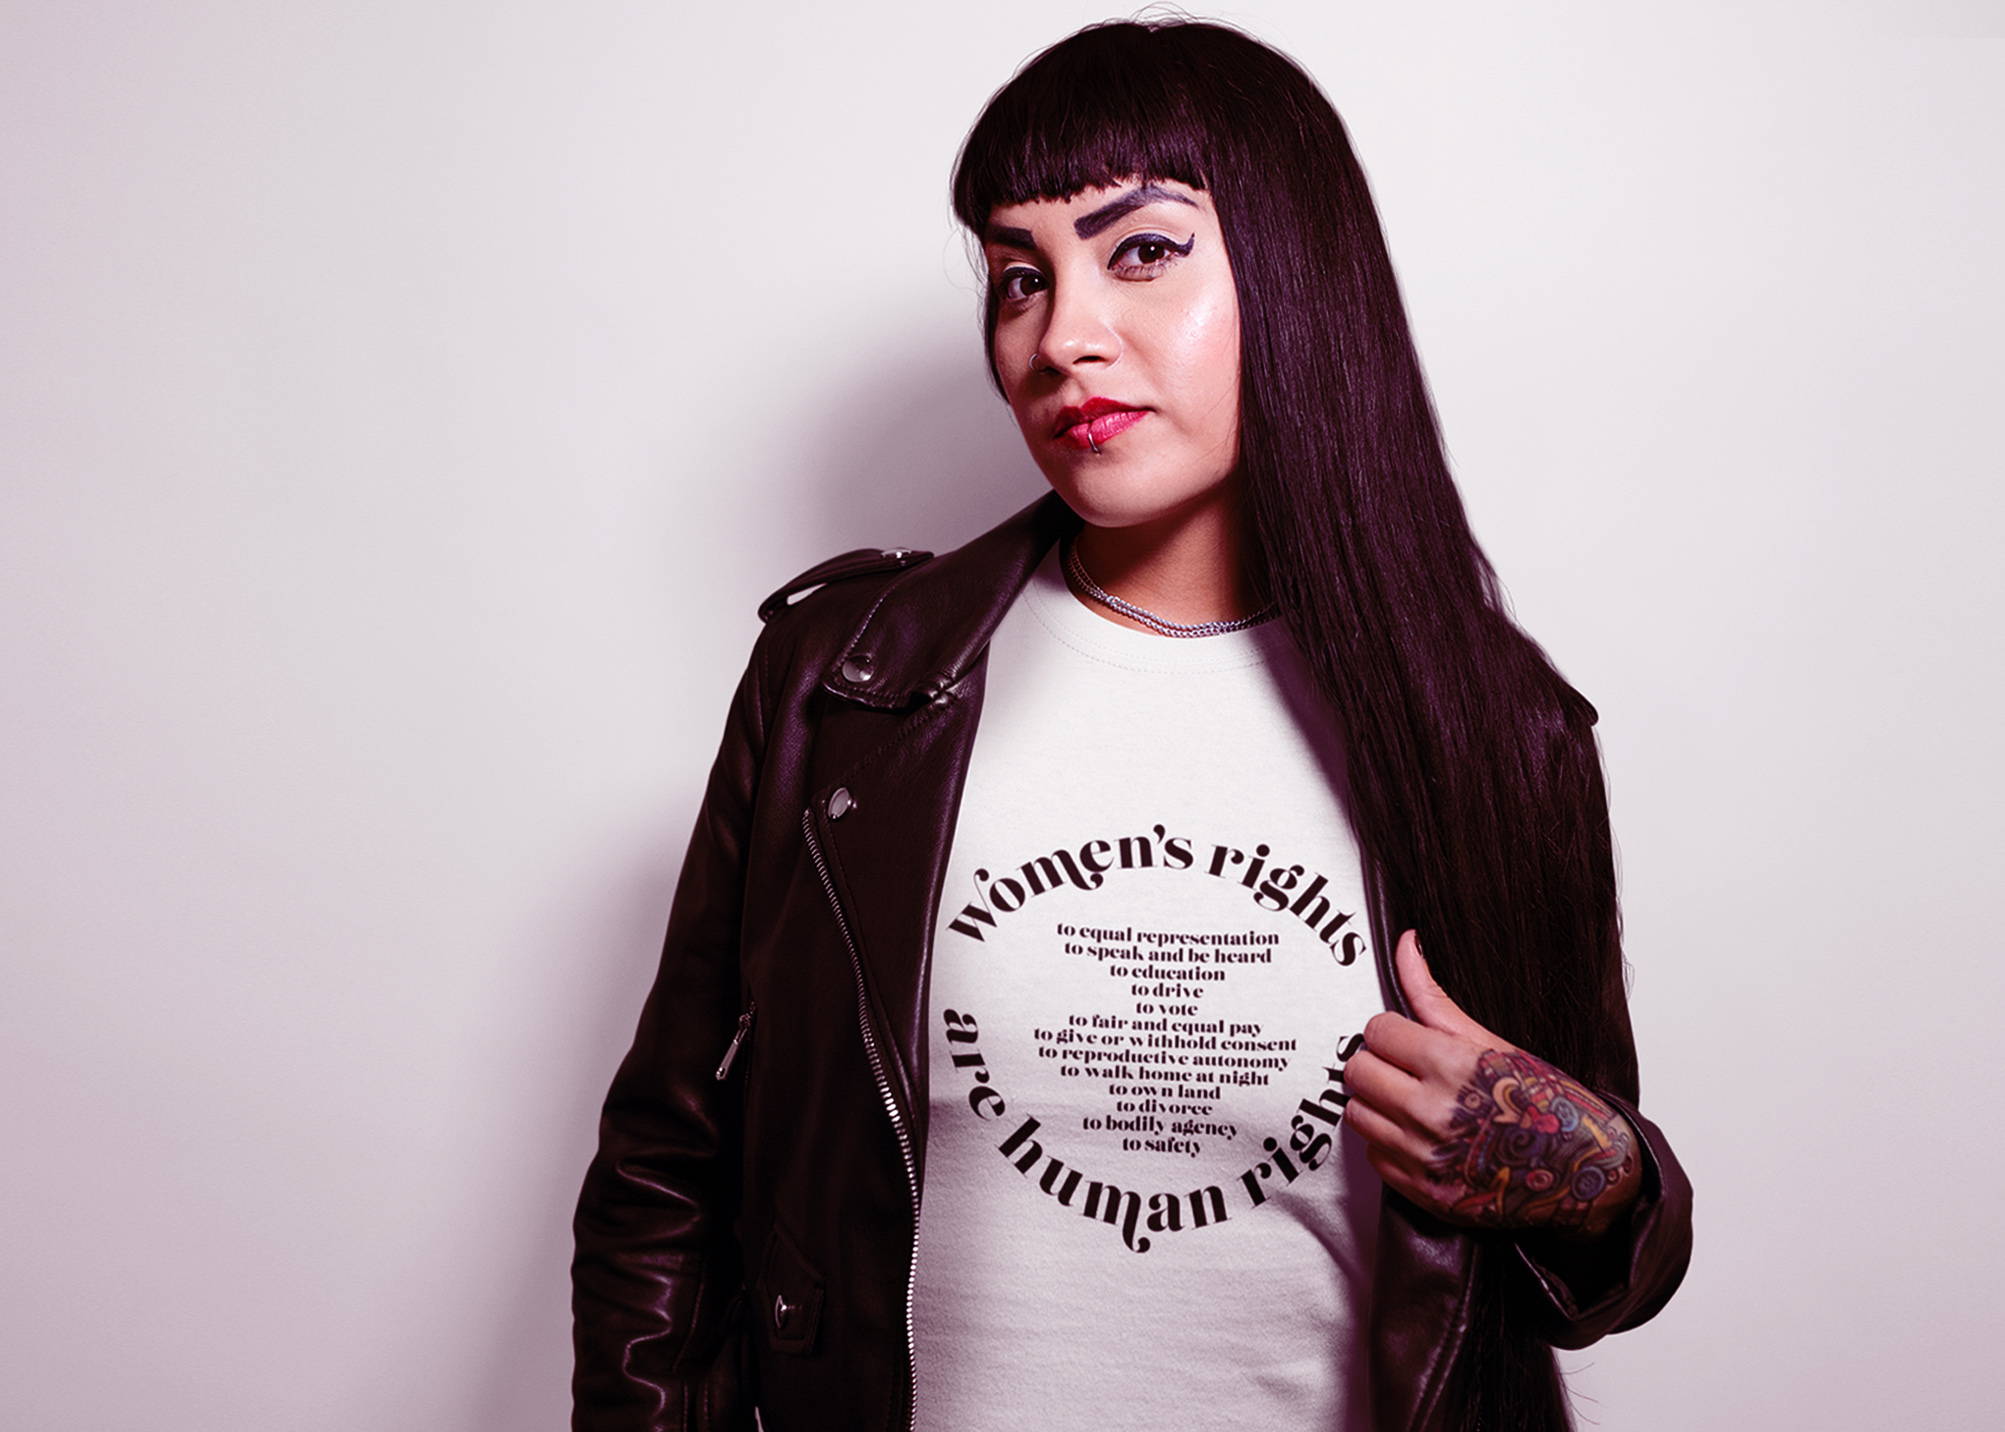 Women's Rights Are Human Rights Tshirt worn by model with brunette hair and amazing eyebrows